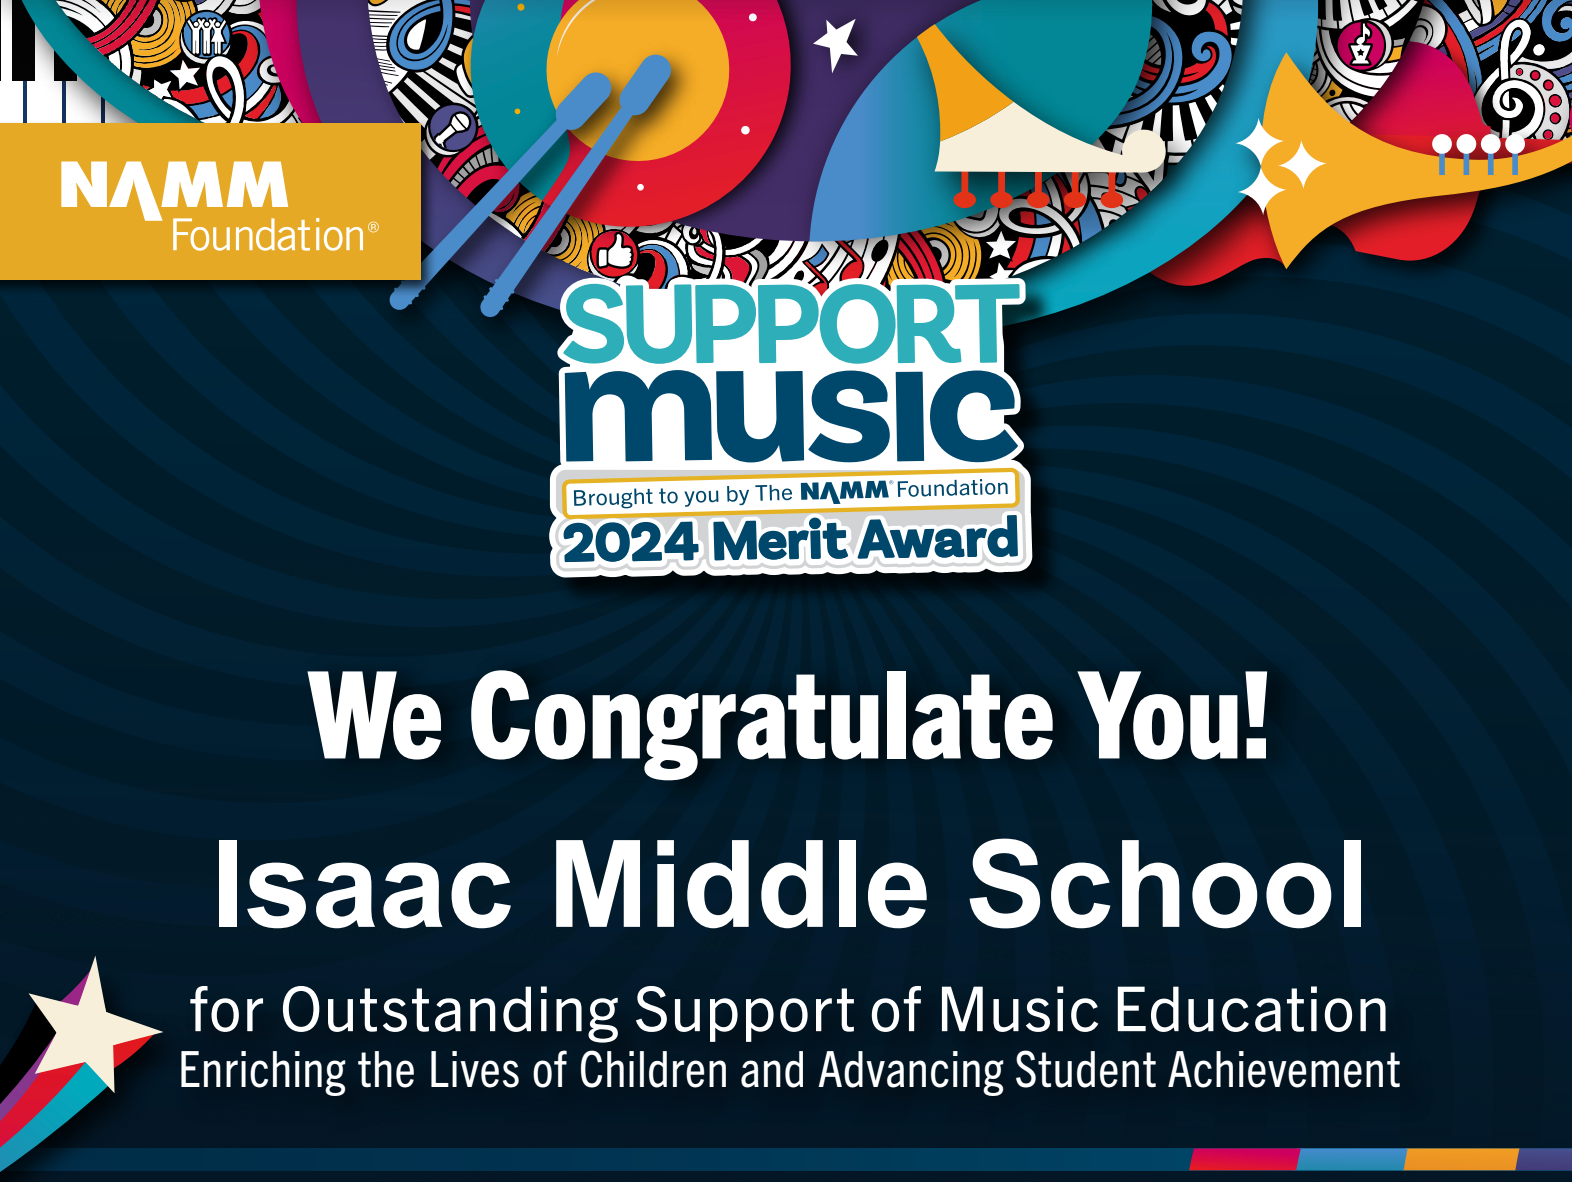 Support Music 2024 Merit Award, We congratulate you Isaac Middle School for Outstanding Support of Music Education enriching the lives of children and advancing student achievement